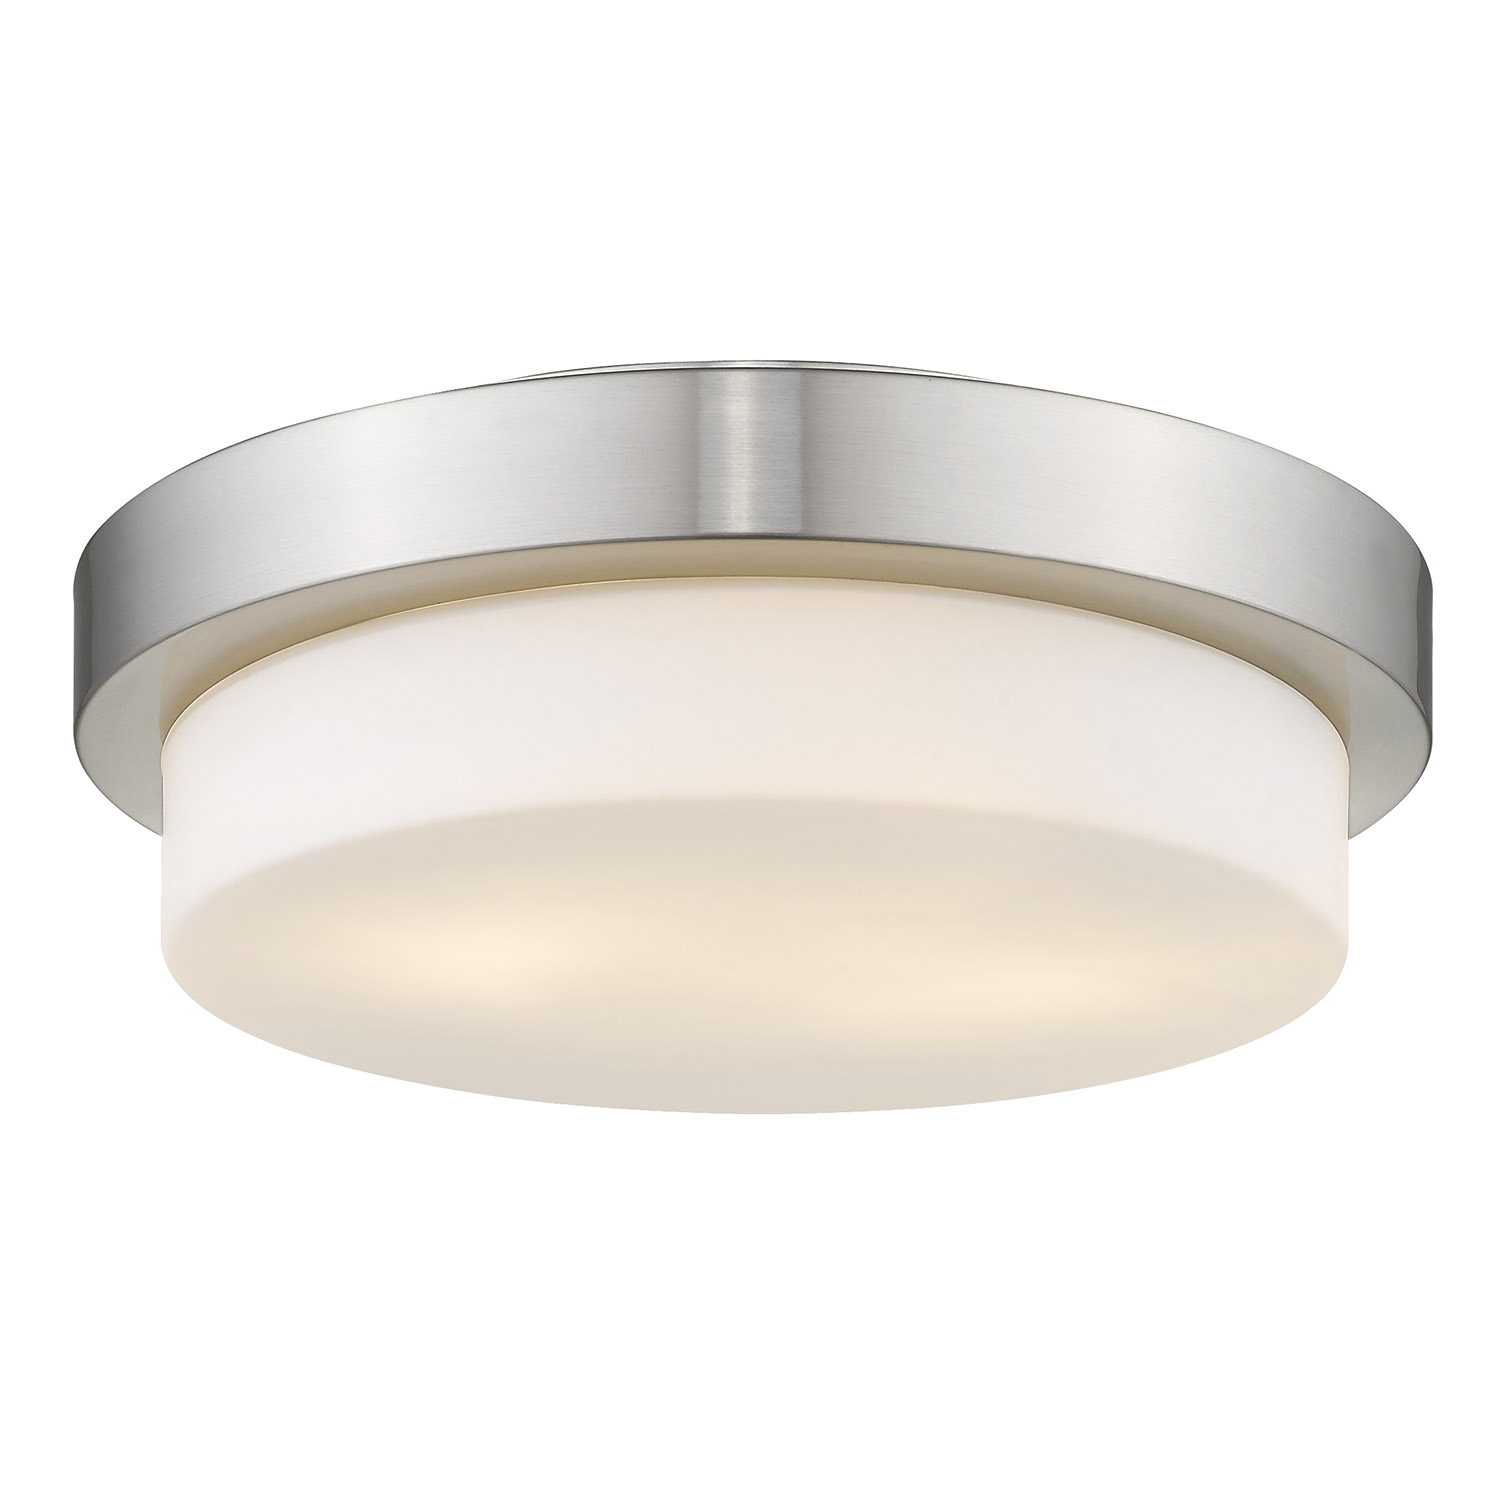 Golden Lighting-1270-13 PW-Multi-family - 2 Light Large Flush Mount in Variety of style - 4.25 Inches high by 13 Inches wide   Pewter Finish with Opal Glass